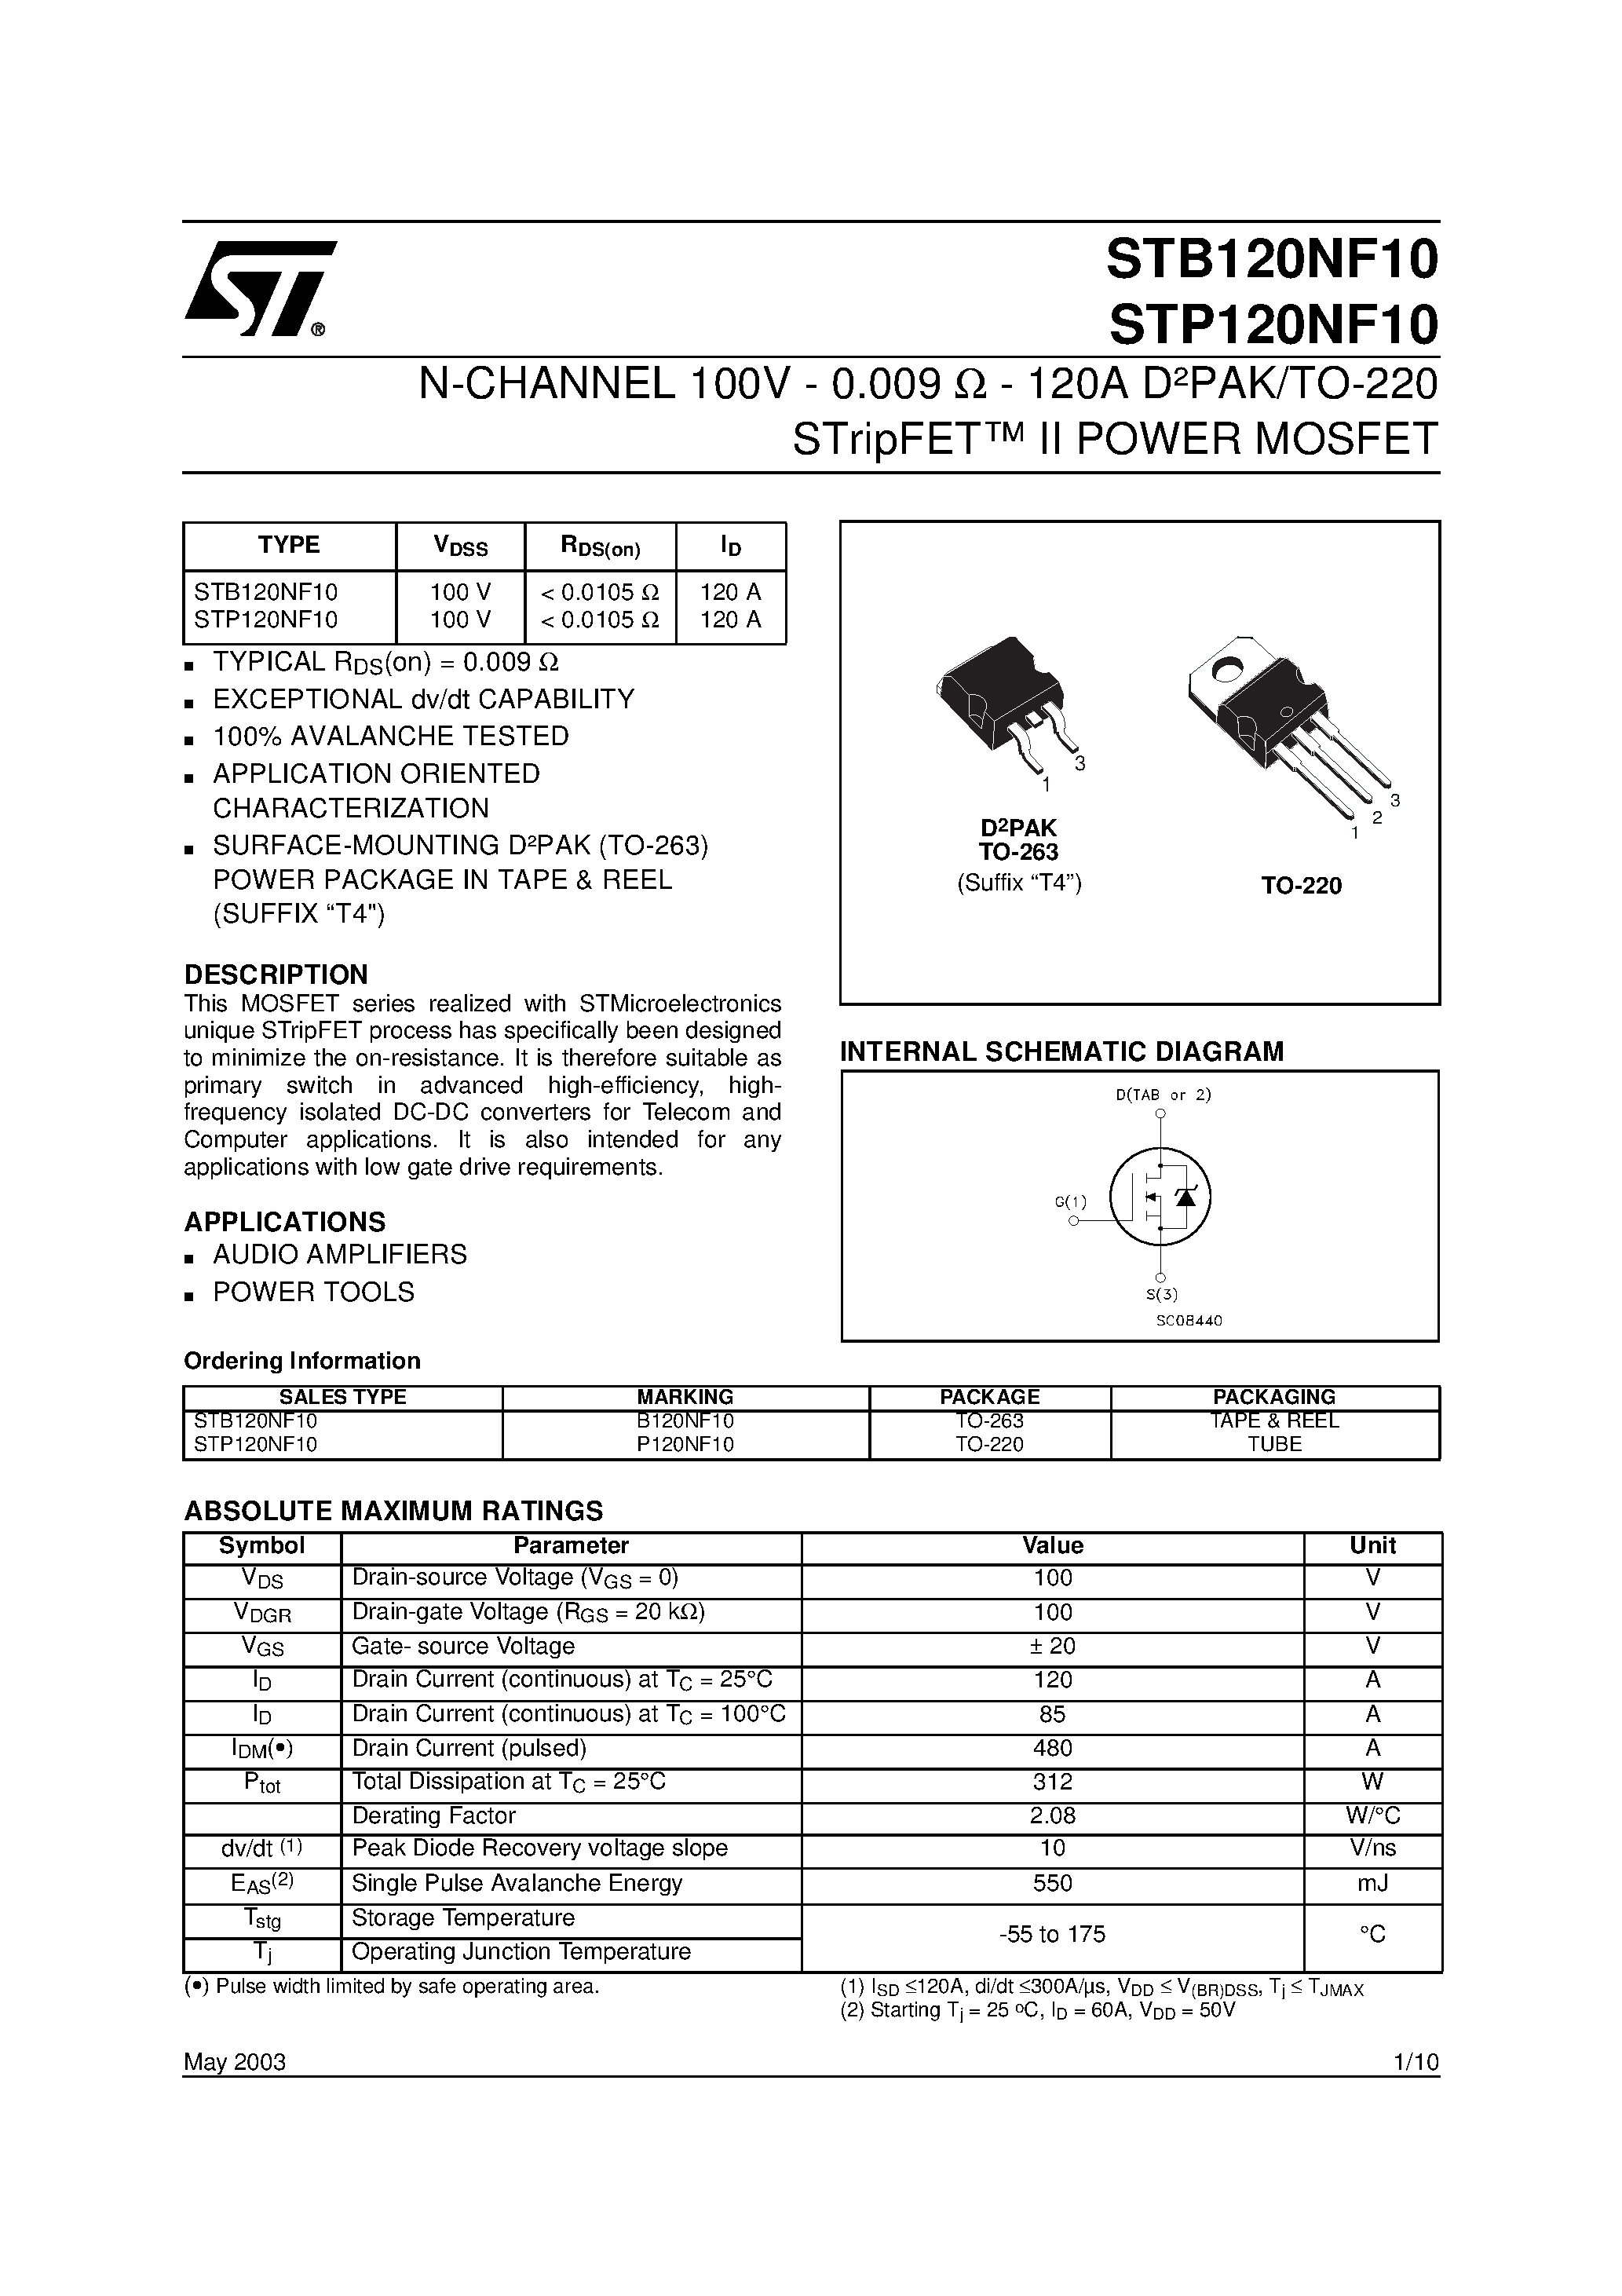 Даташит STP120NF10 - N-CHANNEL 100V - 0.009 W - 120A DPAK/TO-220 STripFET II POWER MOSFET страница 1